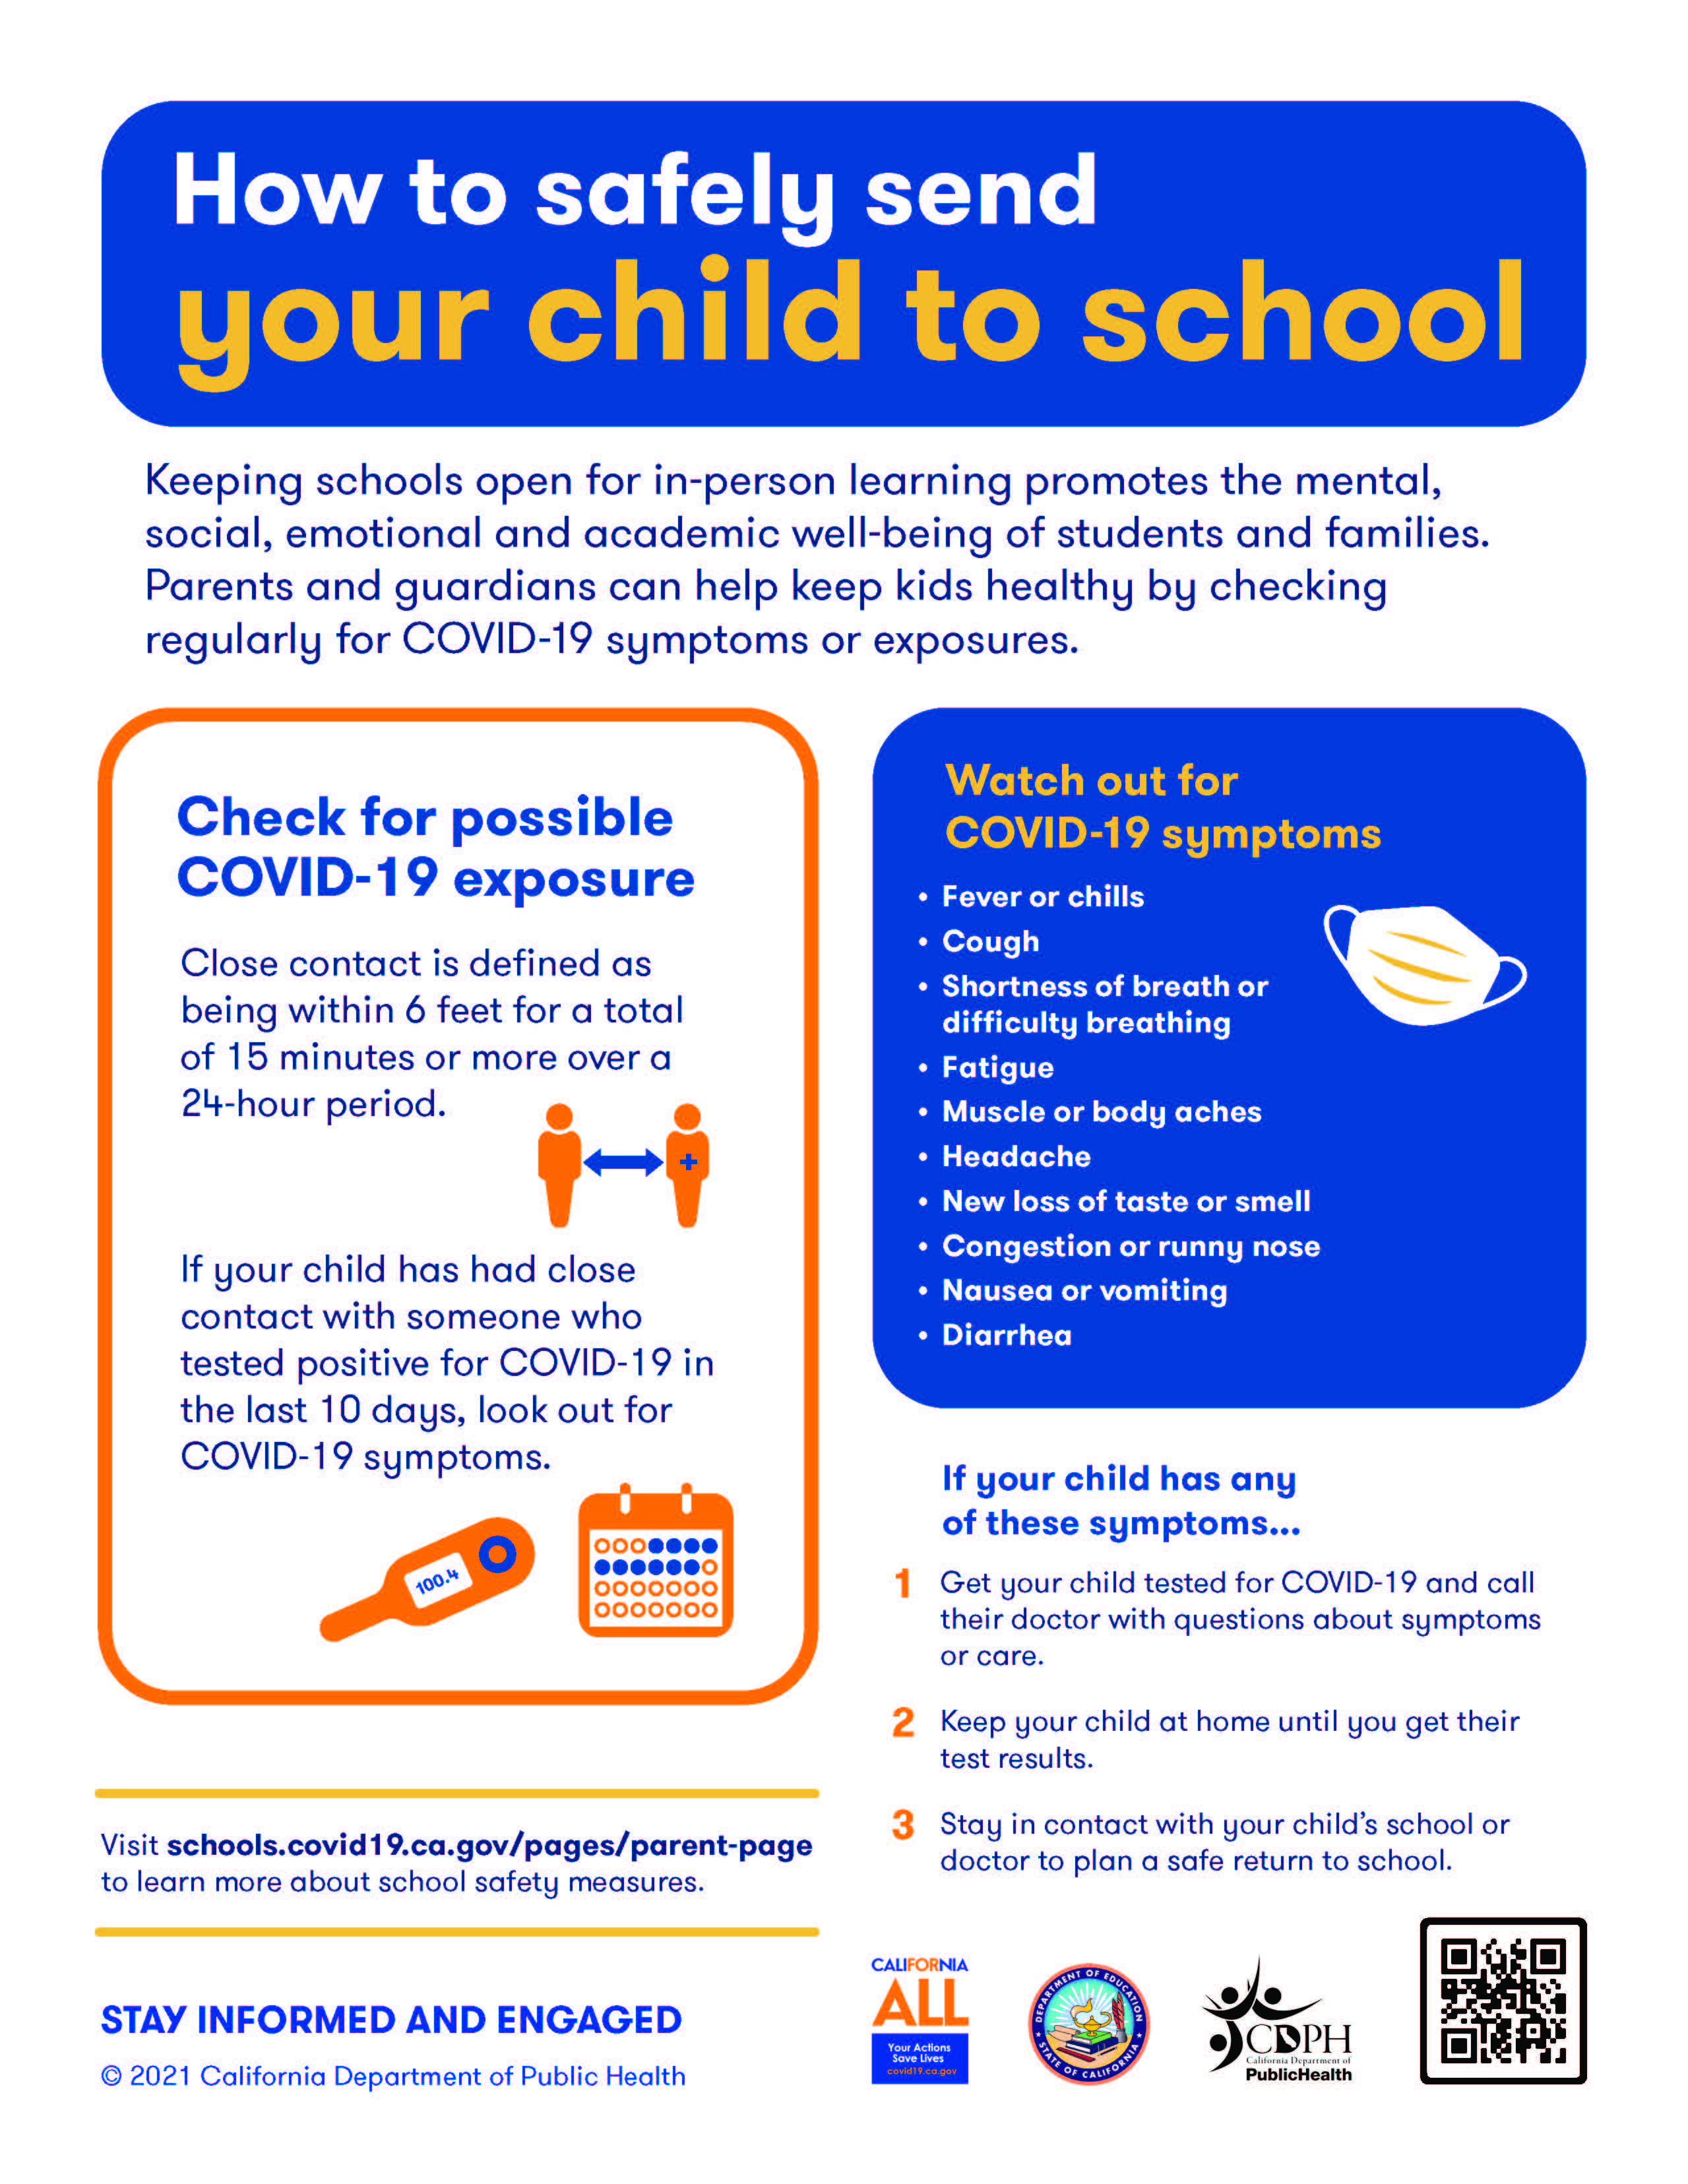 How to safely send your child to school